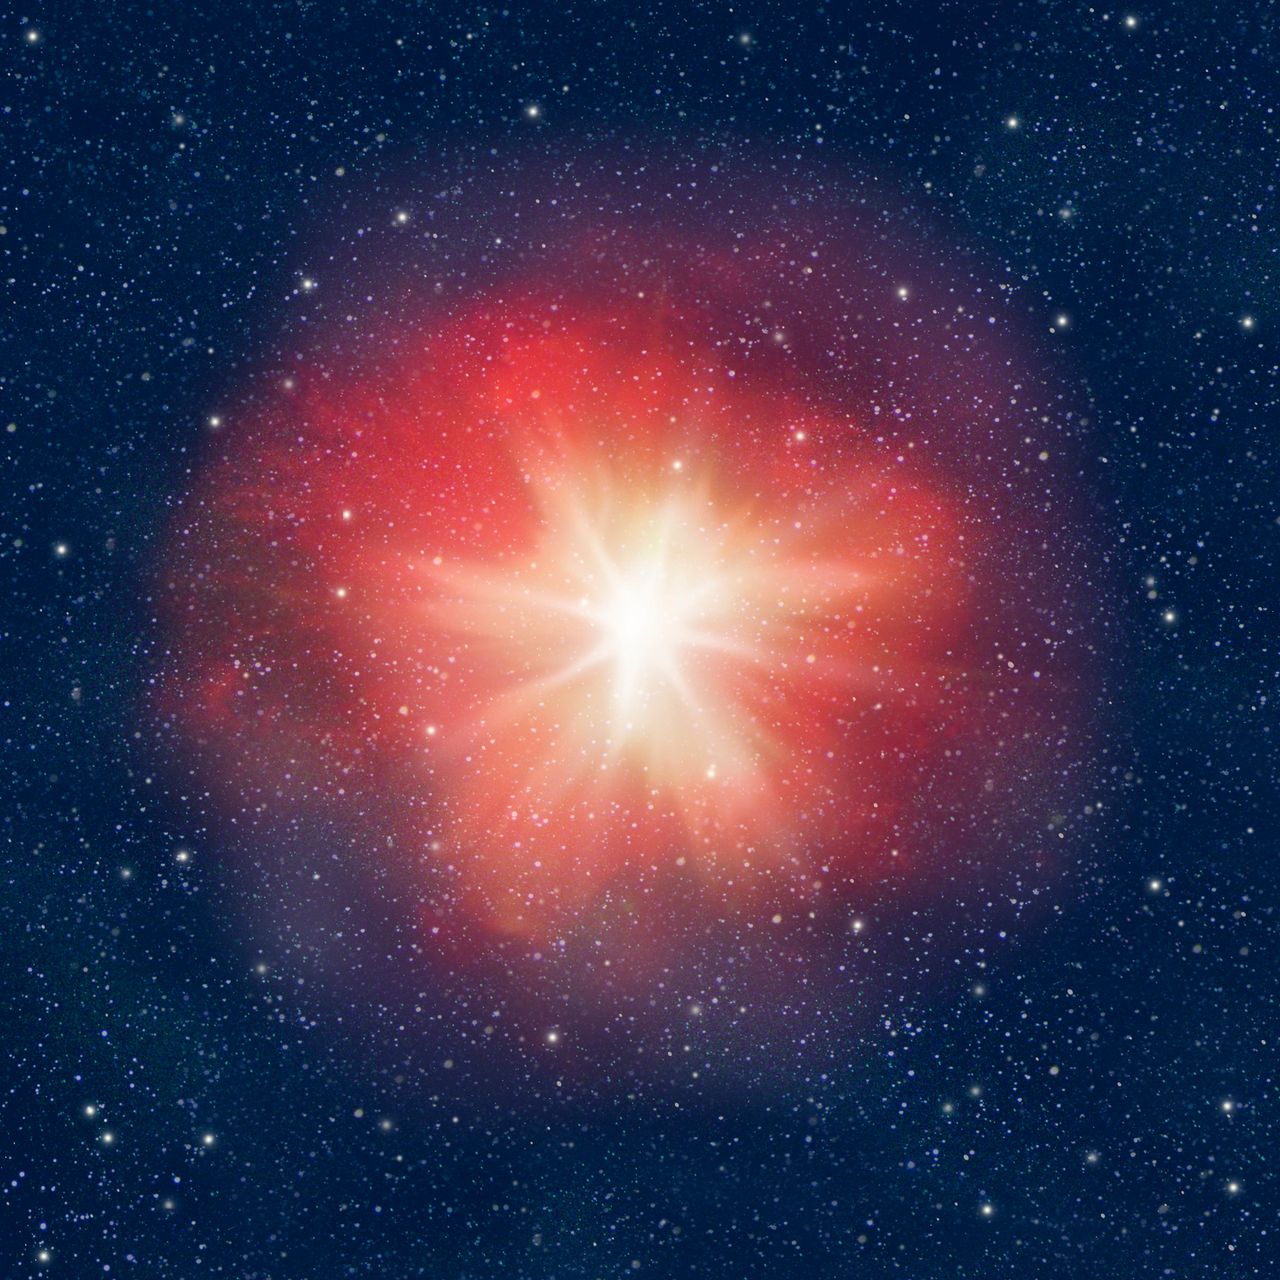 Supernova, A supergiant that collapses onto itself and explodes with such force that it releases more energy than millions of suns.